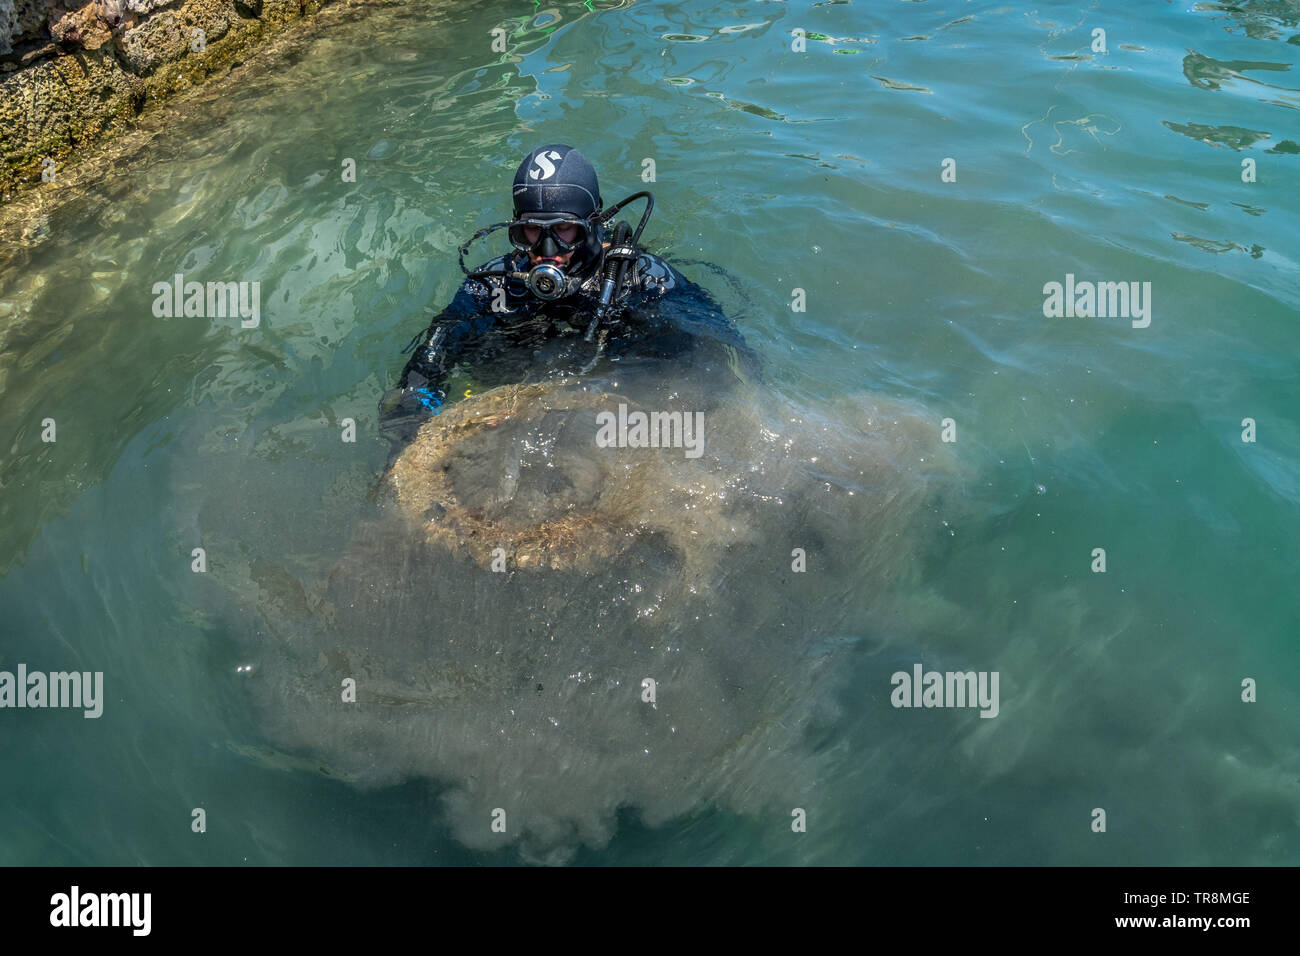 diver taking out a wheel from the bottom of the sea Mahon, Minorca May 22 2019 Stock Photo